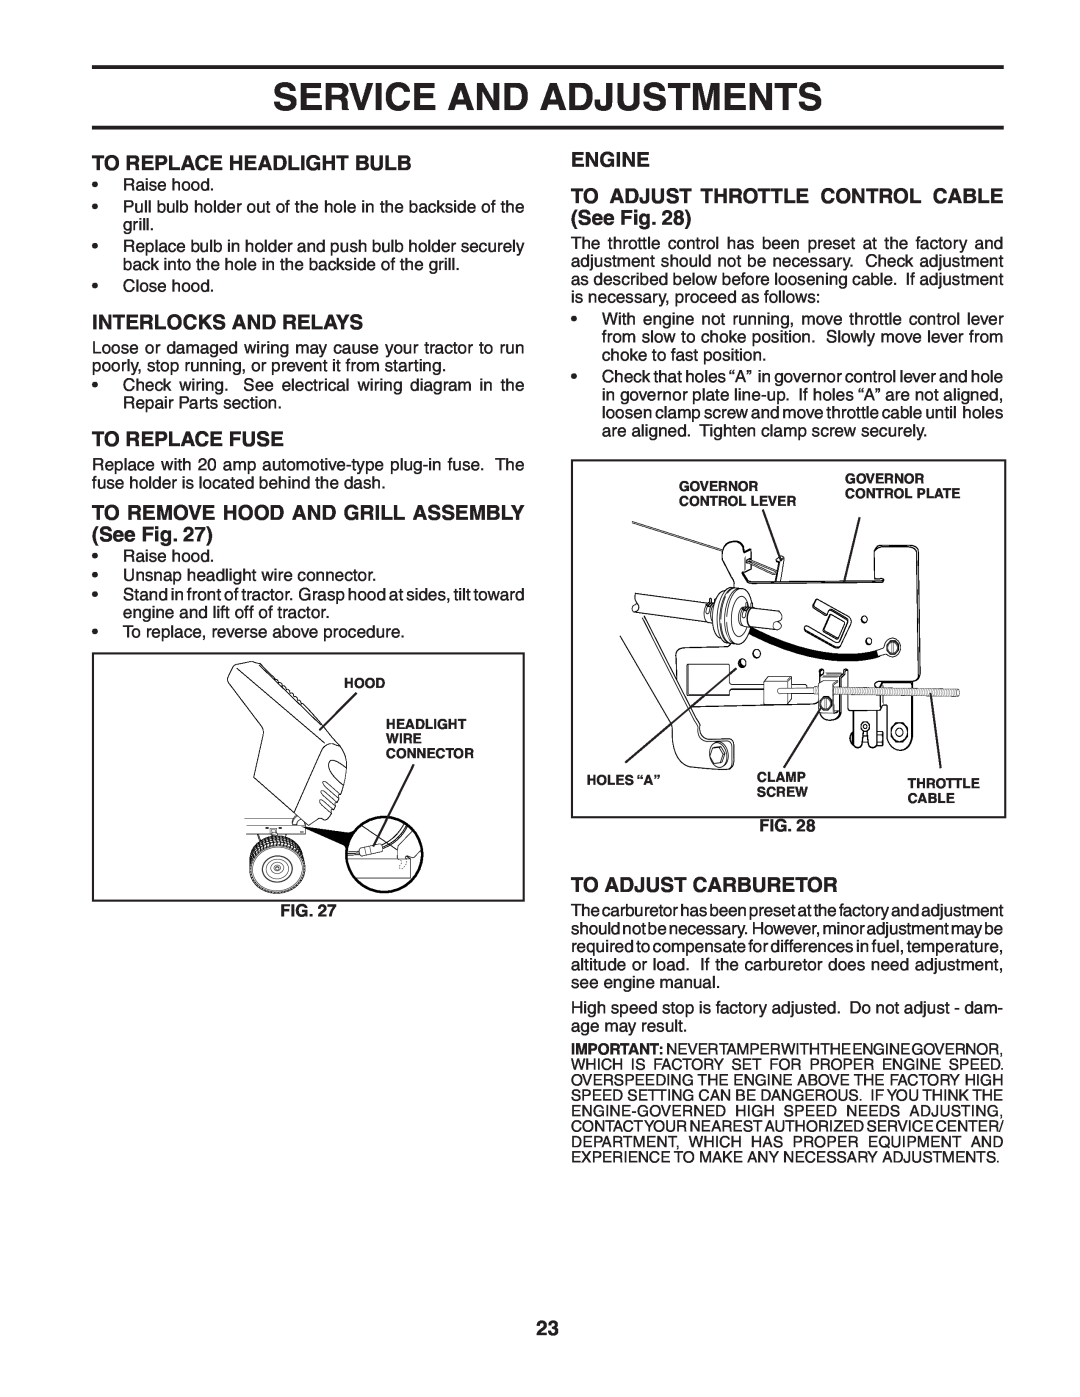 Poulan PO1538C manual To Replace Headlight Bulb, Interlocks And Relays, To Replace Fuse, To Adjust Carburetor 